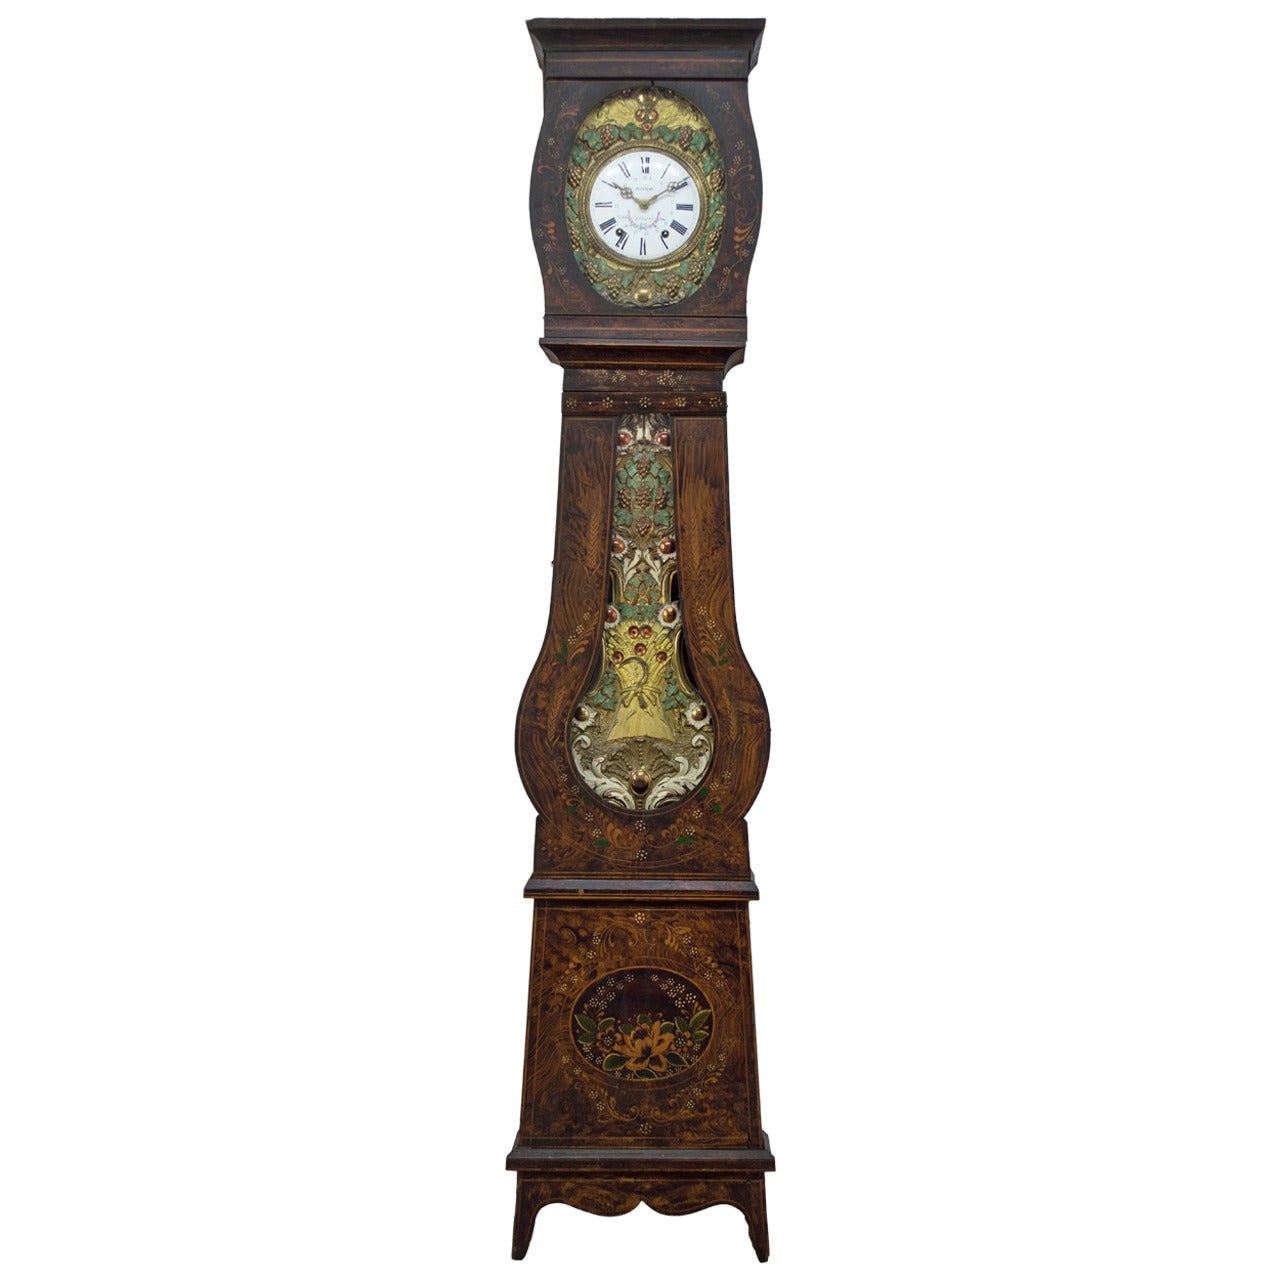 19th Century French Country Comtoise or Grandfather Clock